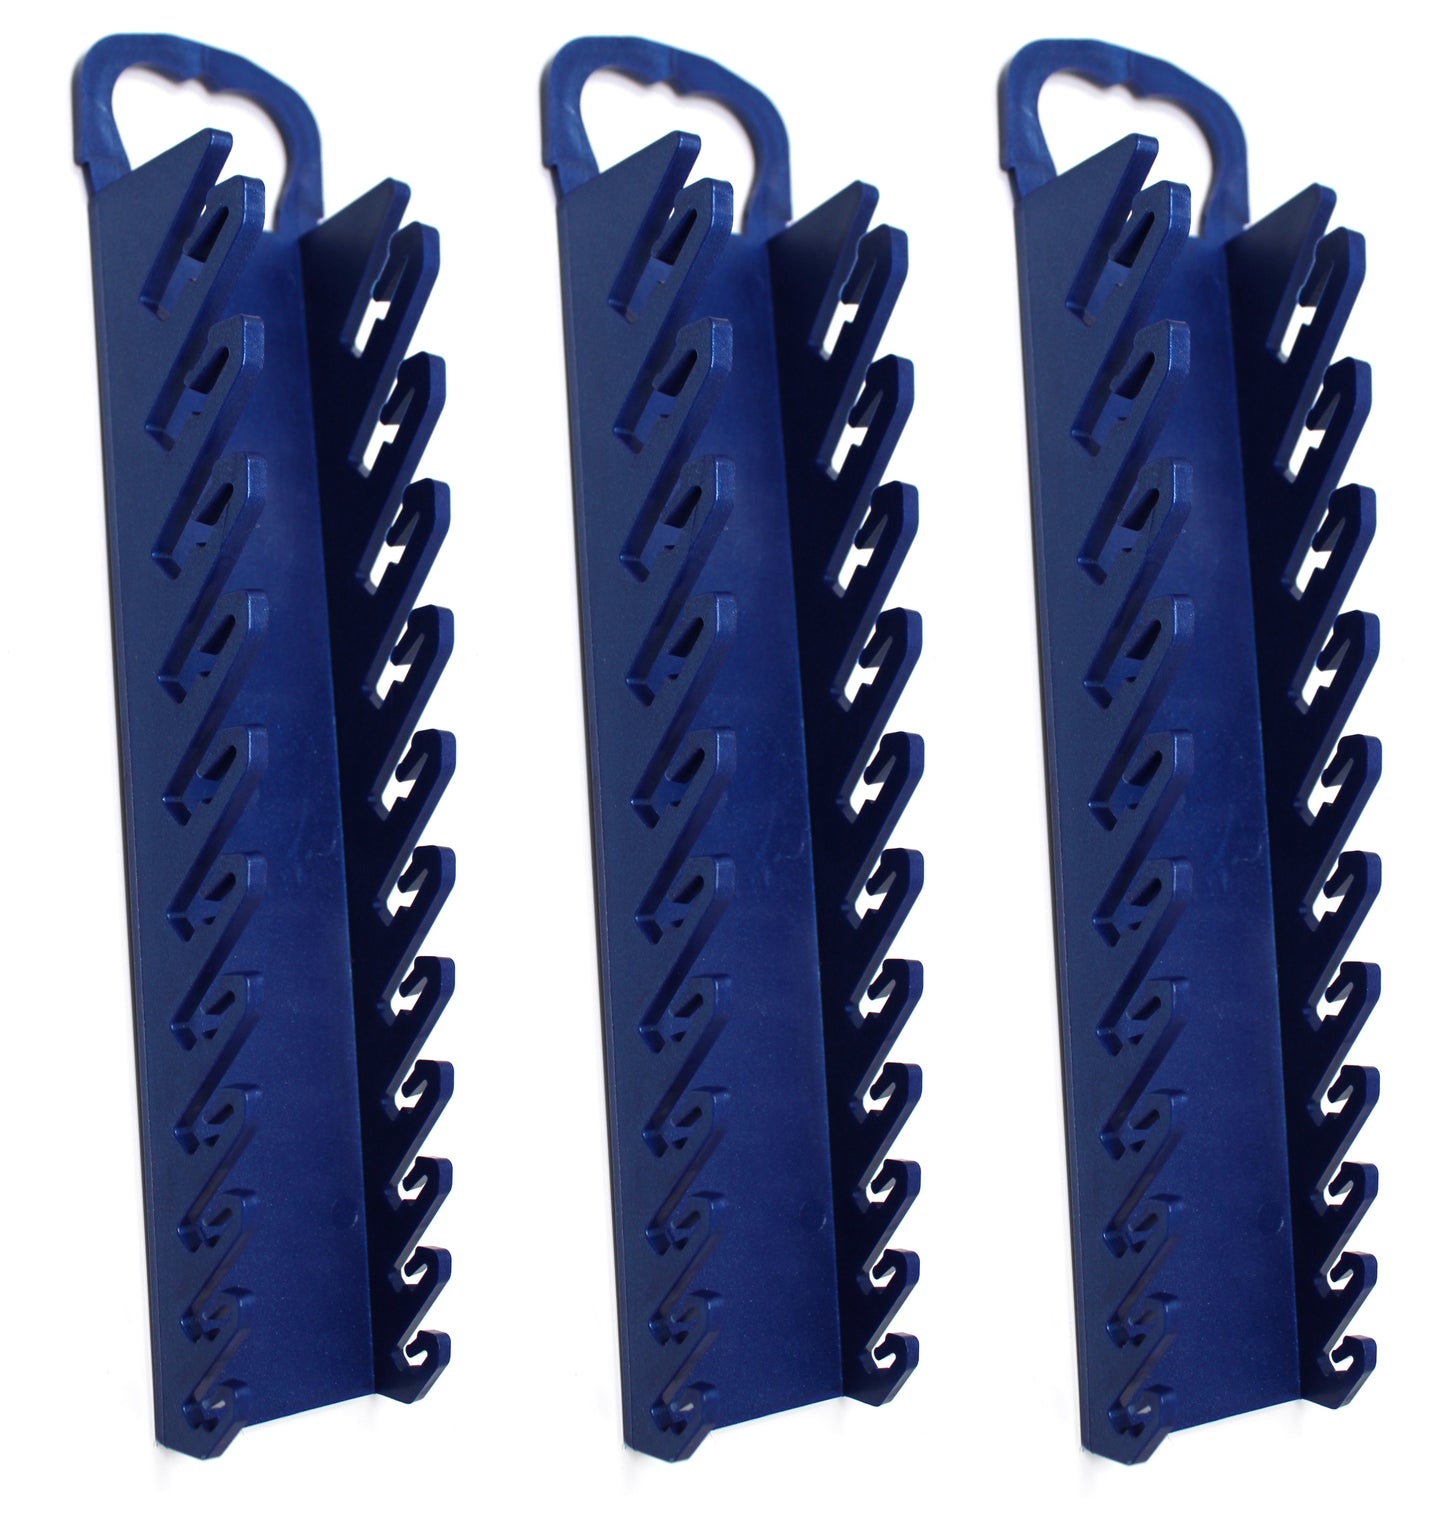 11-Tool Plastic Portable Wrench Gripper Organizer Holder Tray for Stubby or Line Wrenches